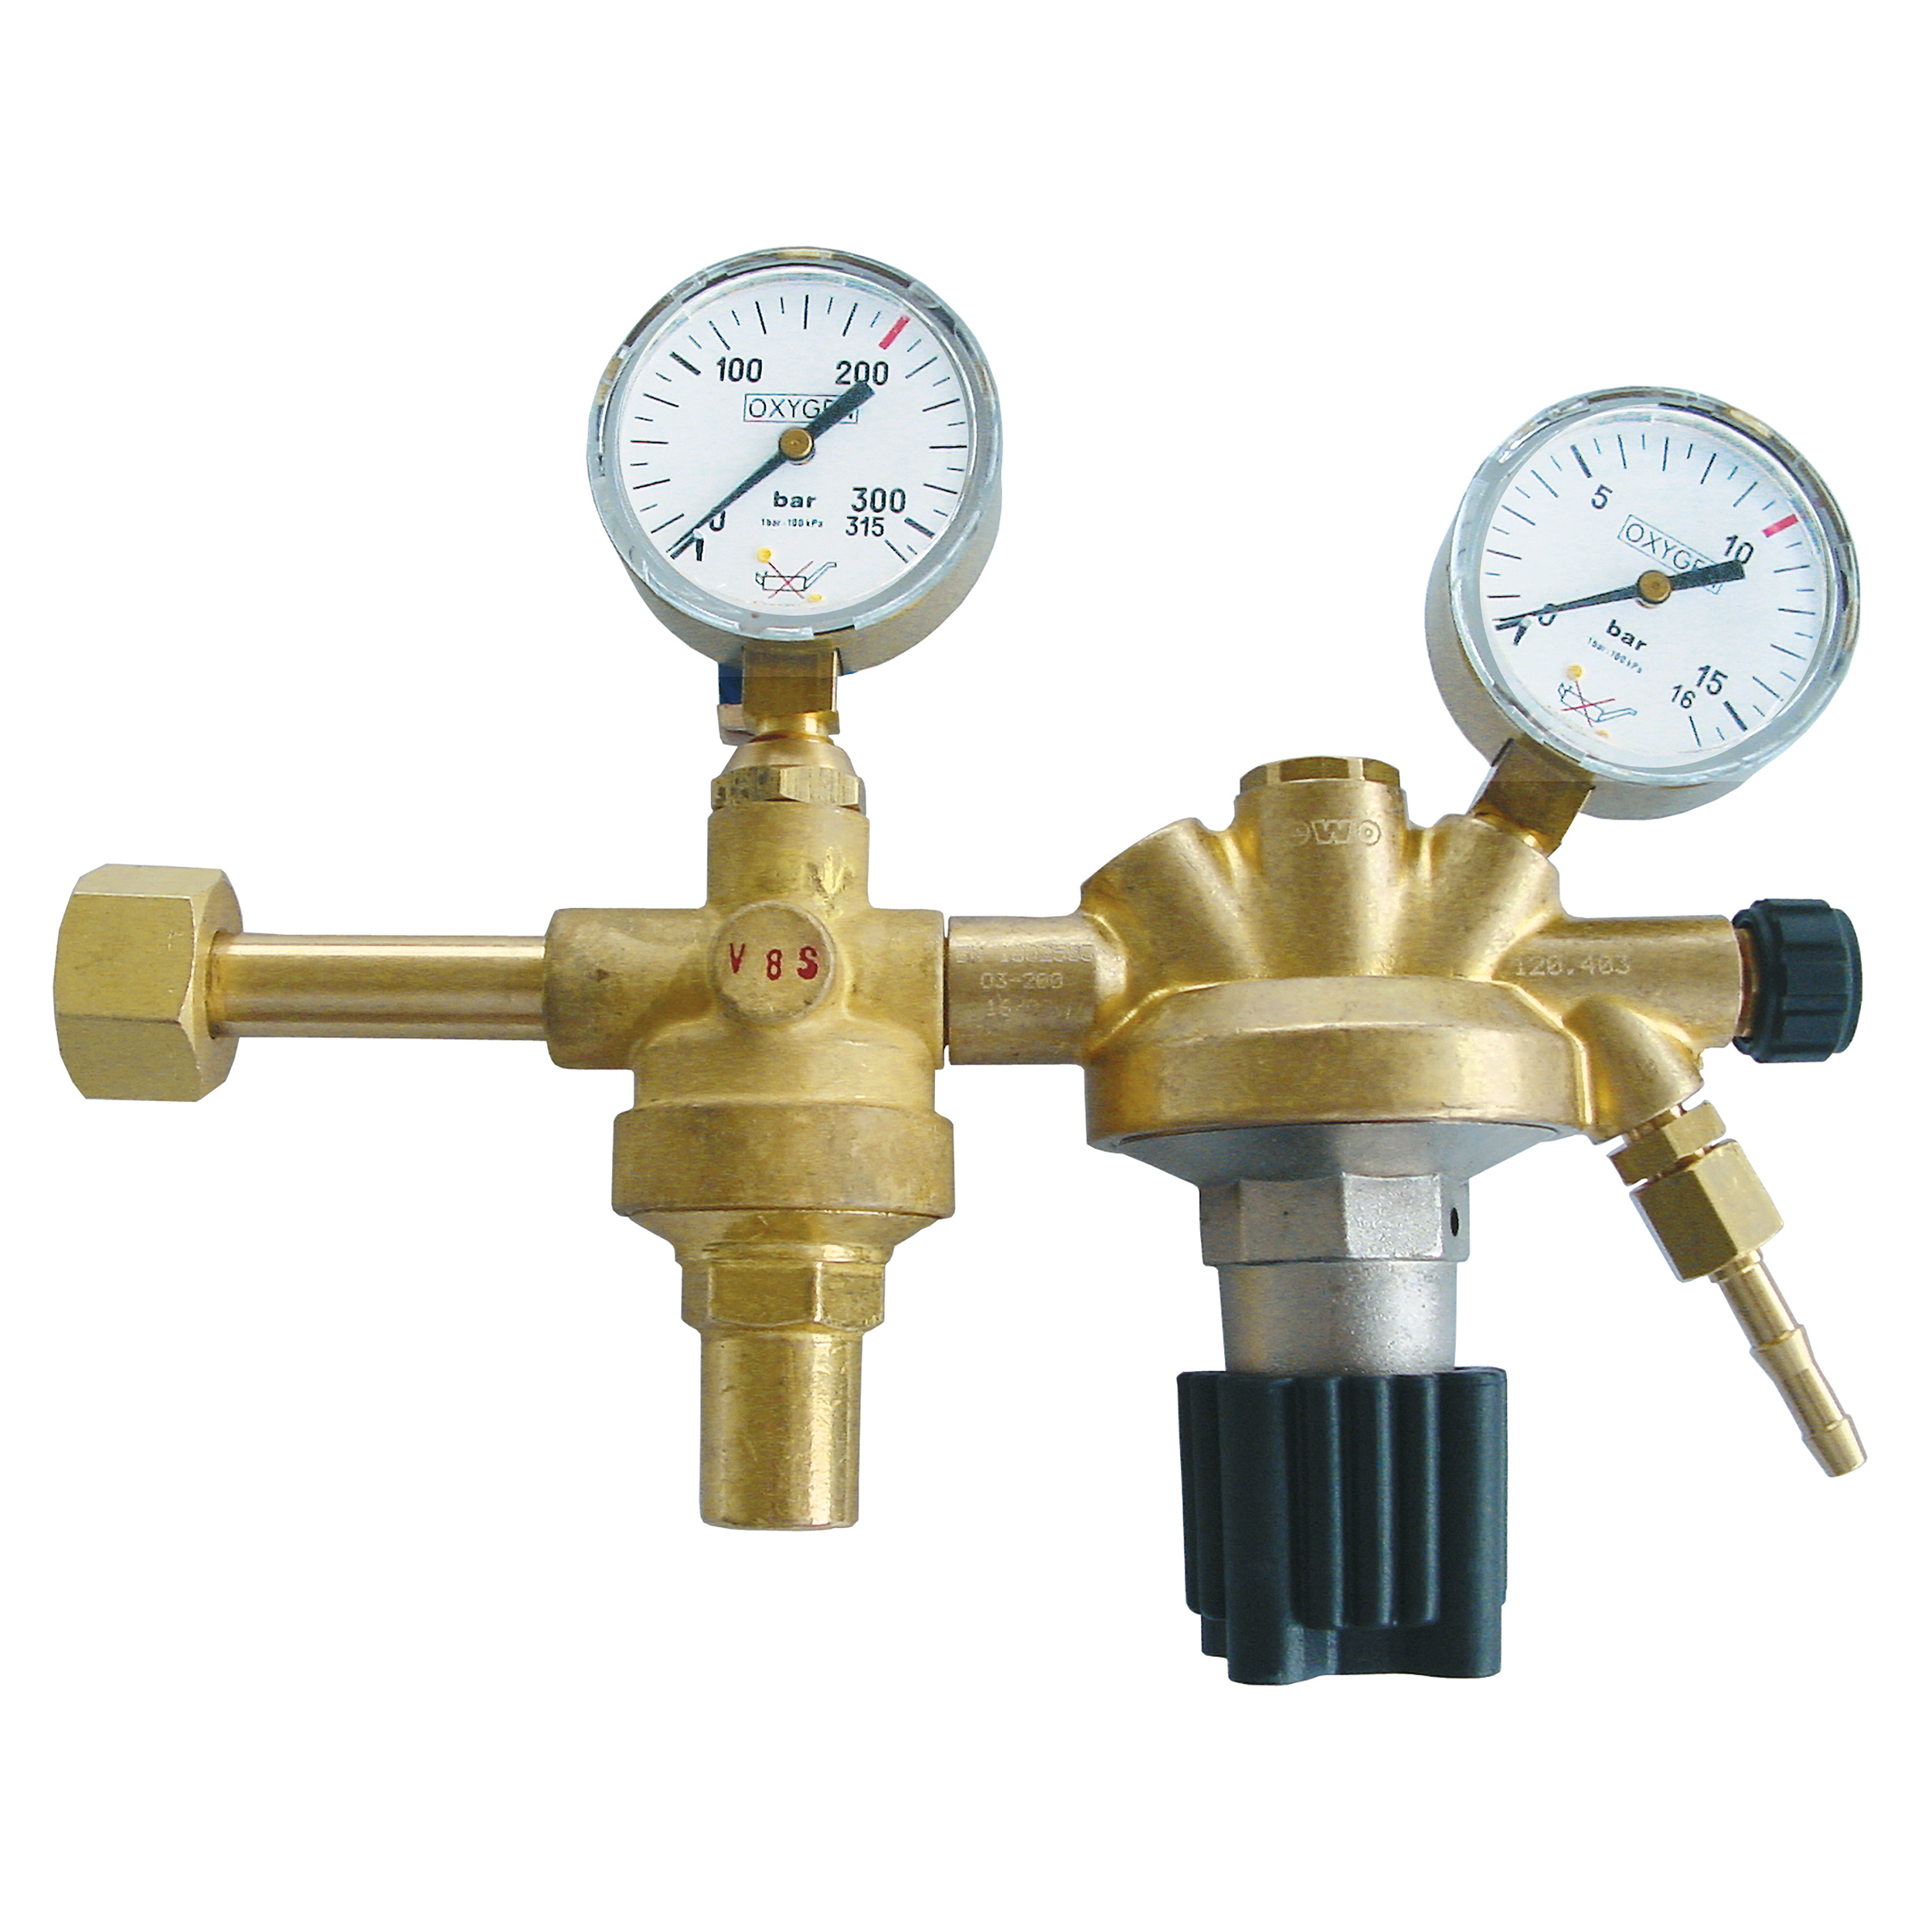 2-step gas regulator for 200 bar cylinders, non-burnable gas